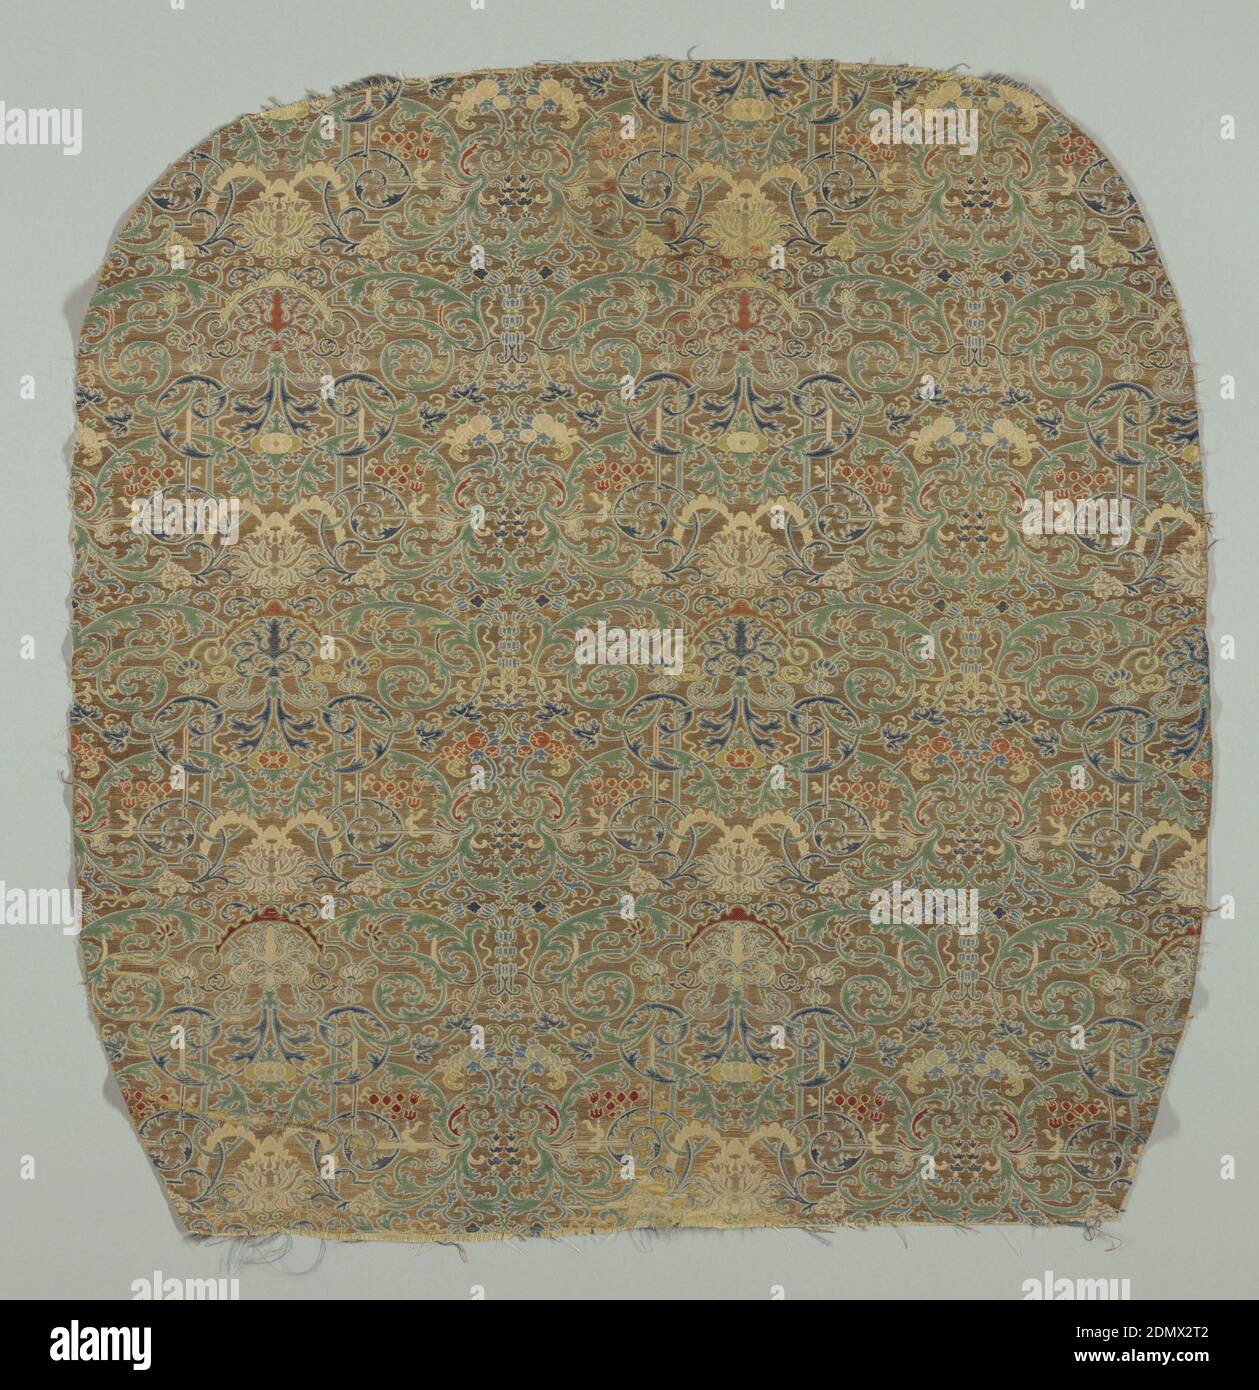 Fragment, Medium: silk, metallic Technique: woven, Close pattern of scrolls and curves., China, 19th century, woven textiles, Fragment Stock Photo